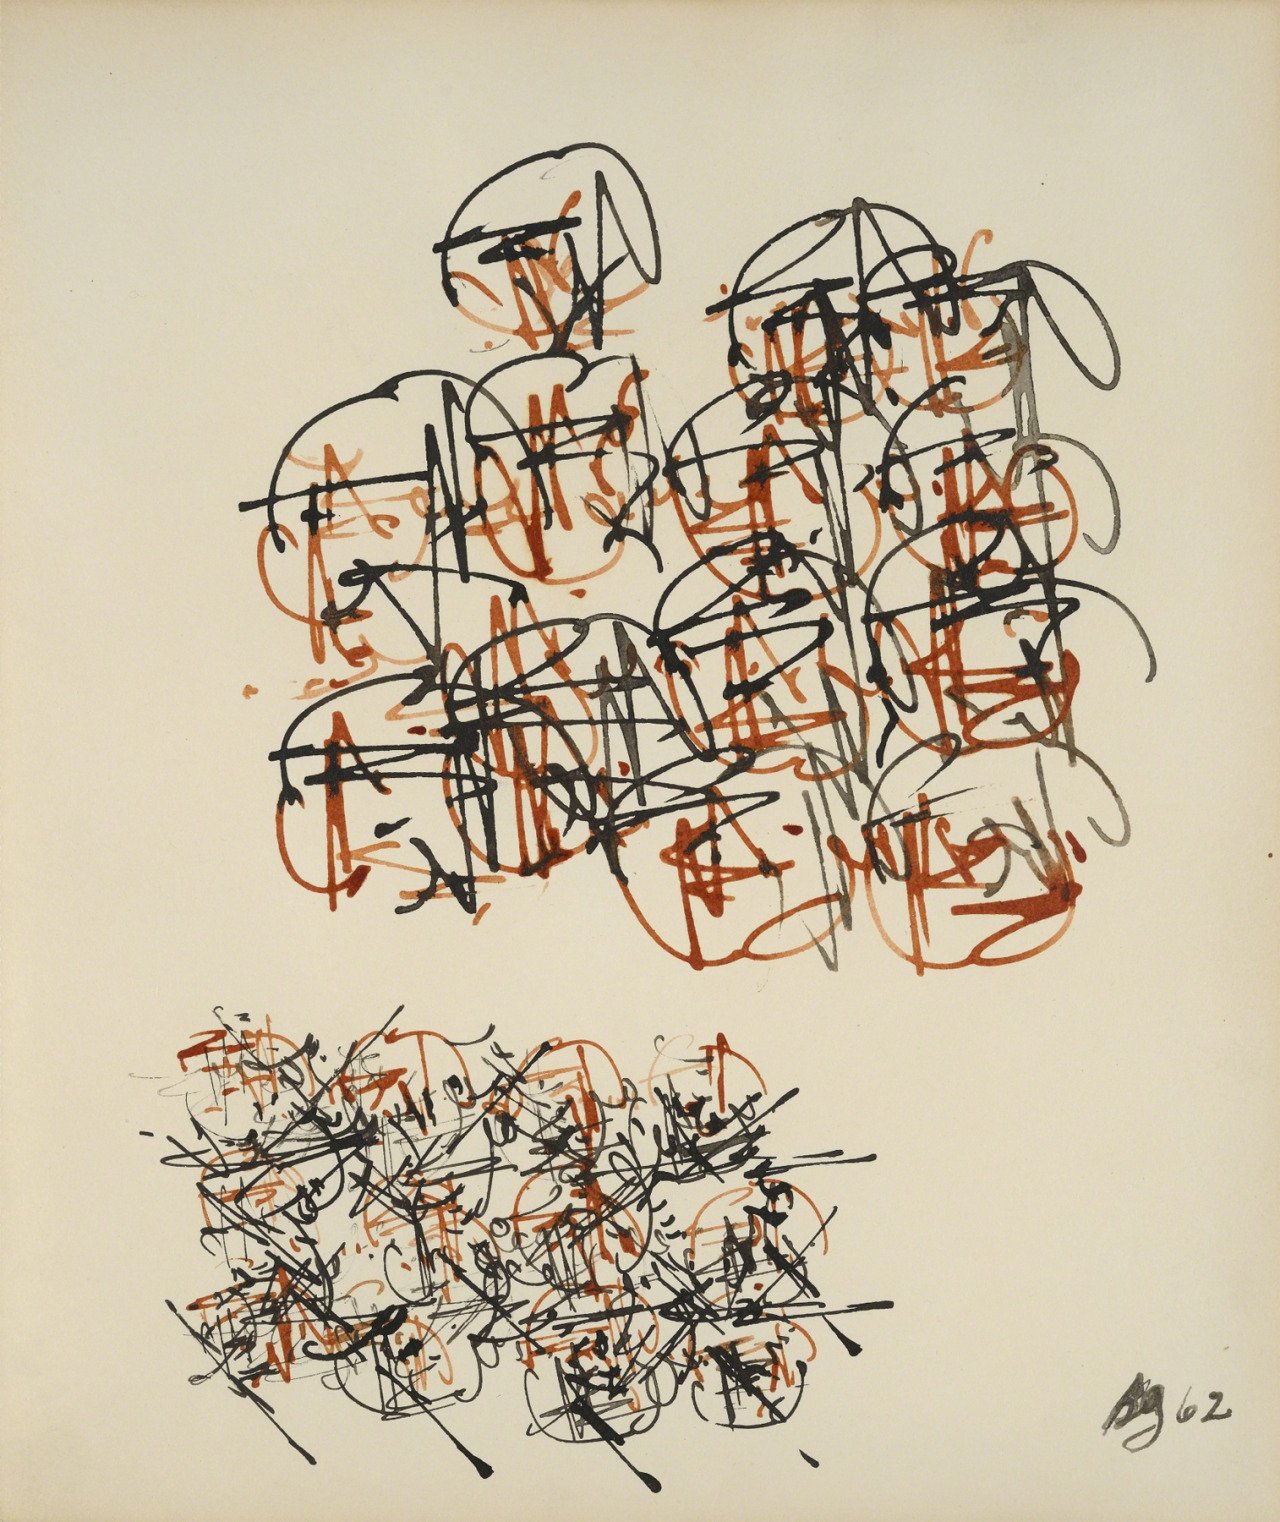 Brion Gysin - Untitled (watercolor and India ink on paper), 1962